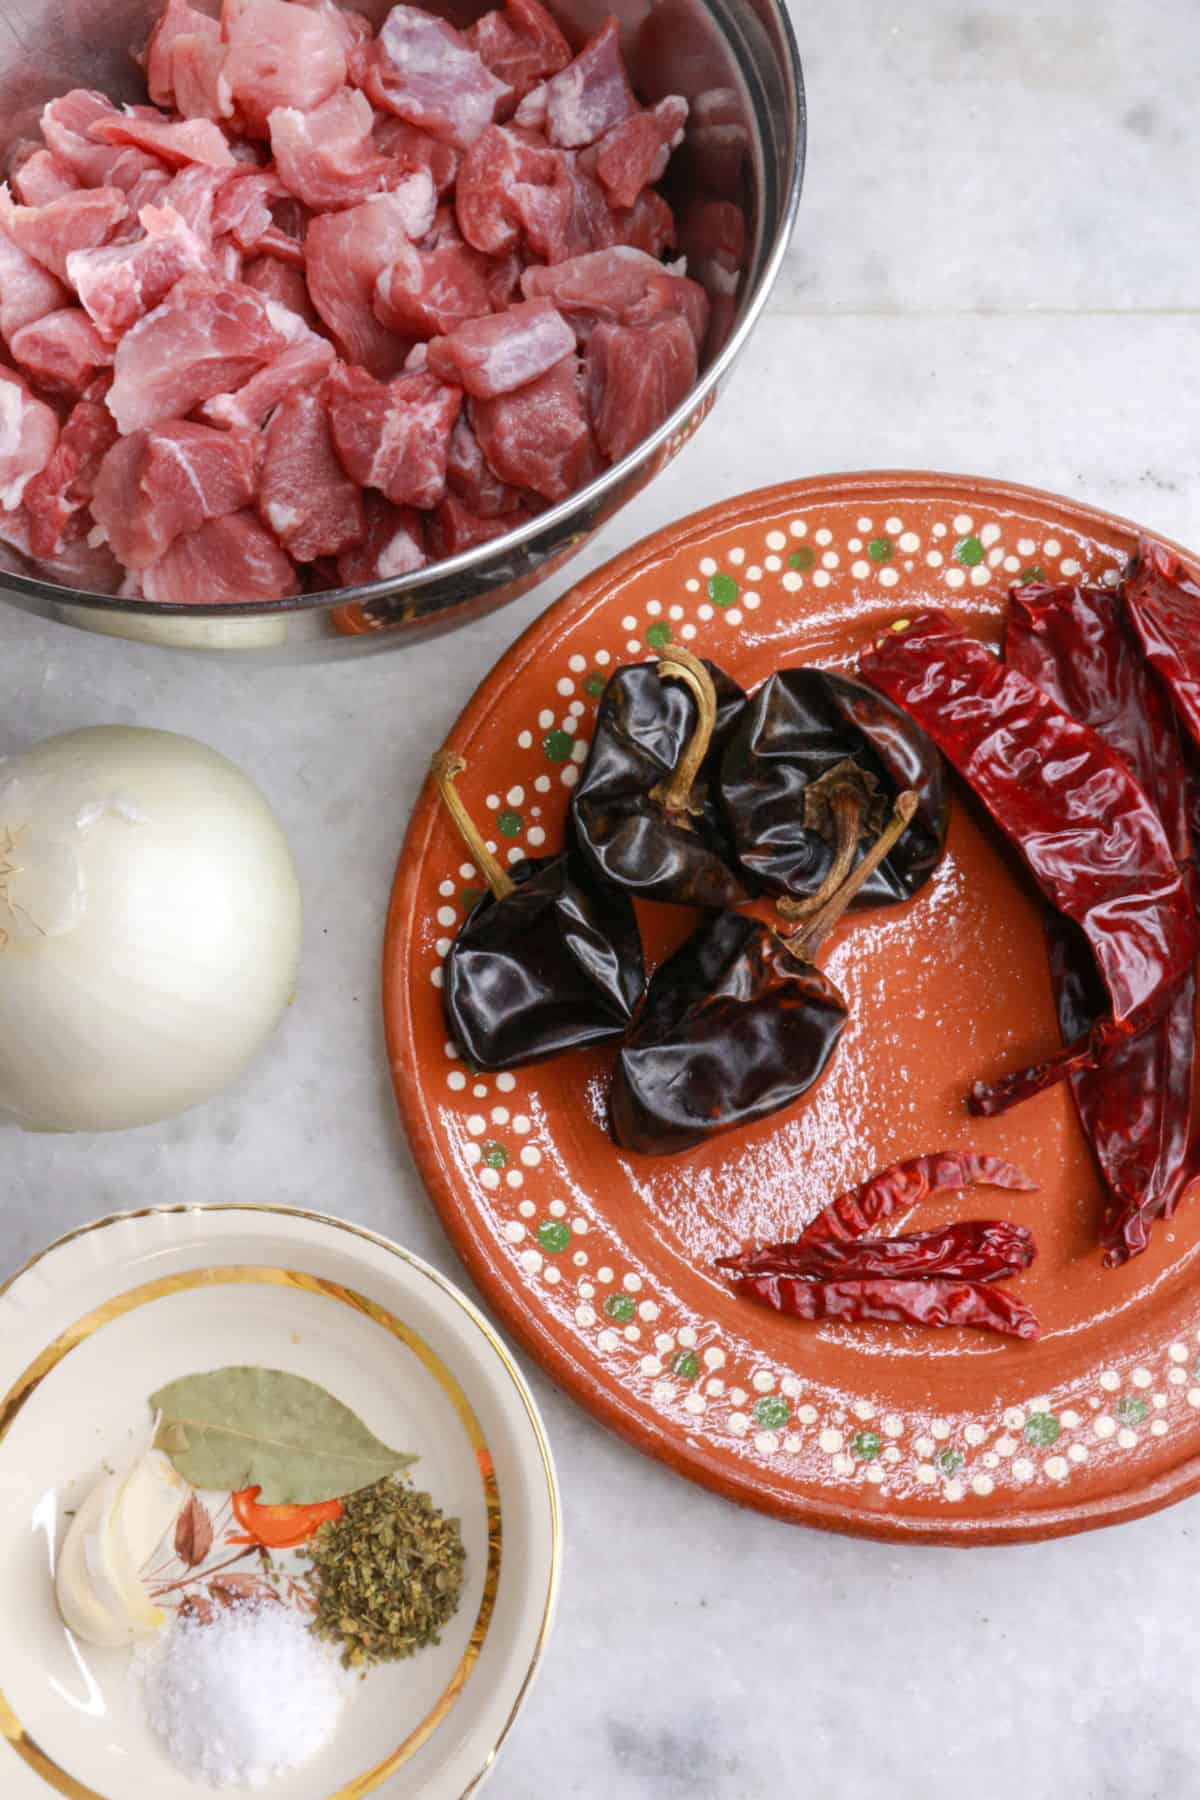 A mixing bowl with cubed raw pork, an onion, a plate with dried chiles, a small bowl with salt, oregano and a bay leaf